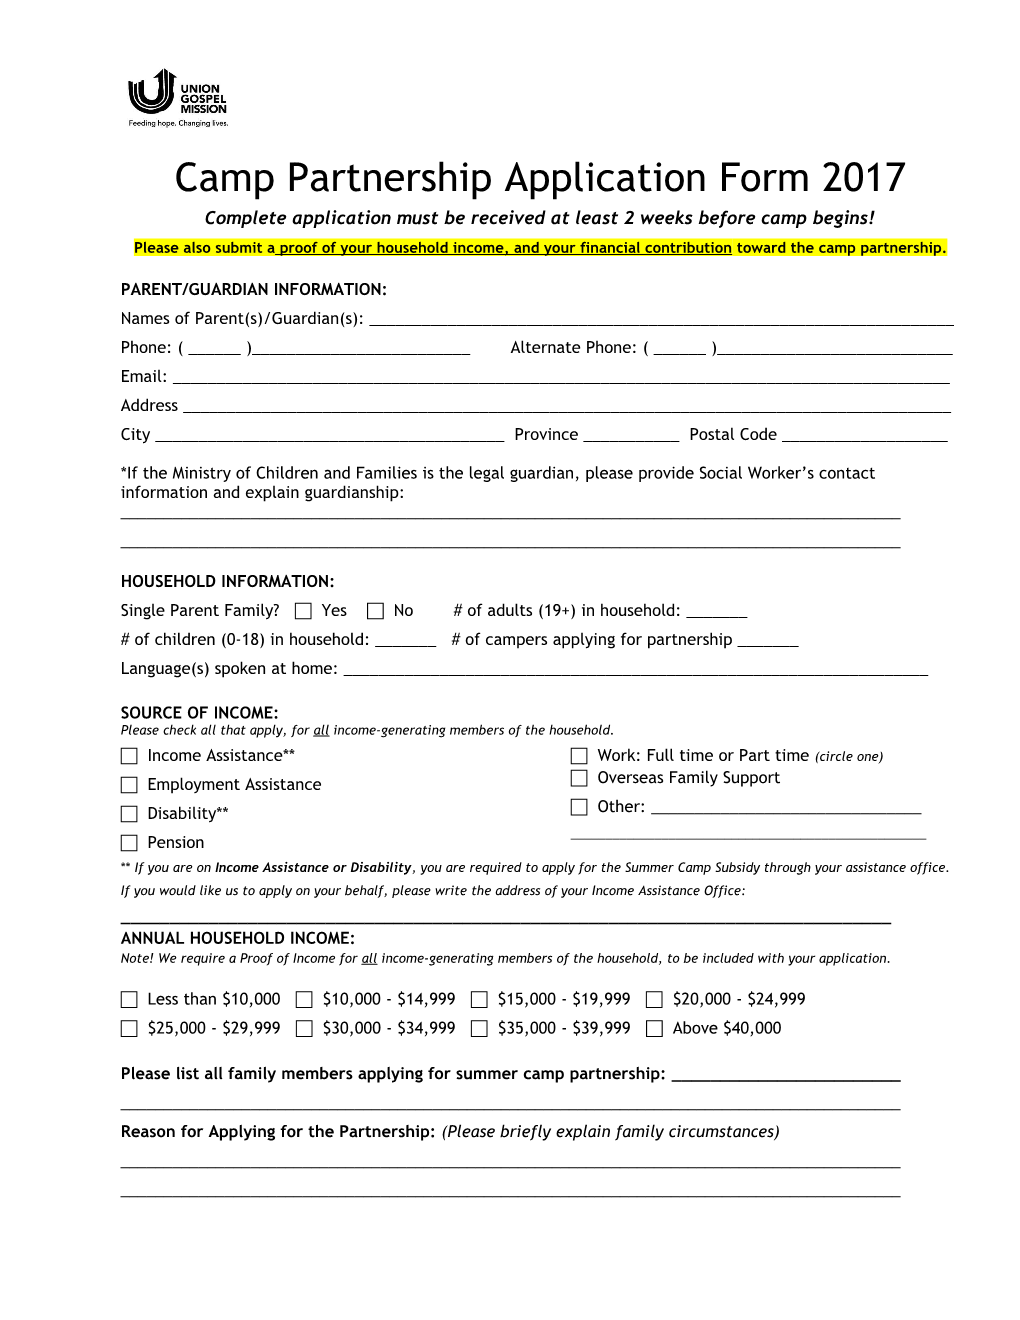 Complete Application Must Be Received at Least 2 Weeks Before Camp Begins!